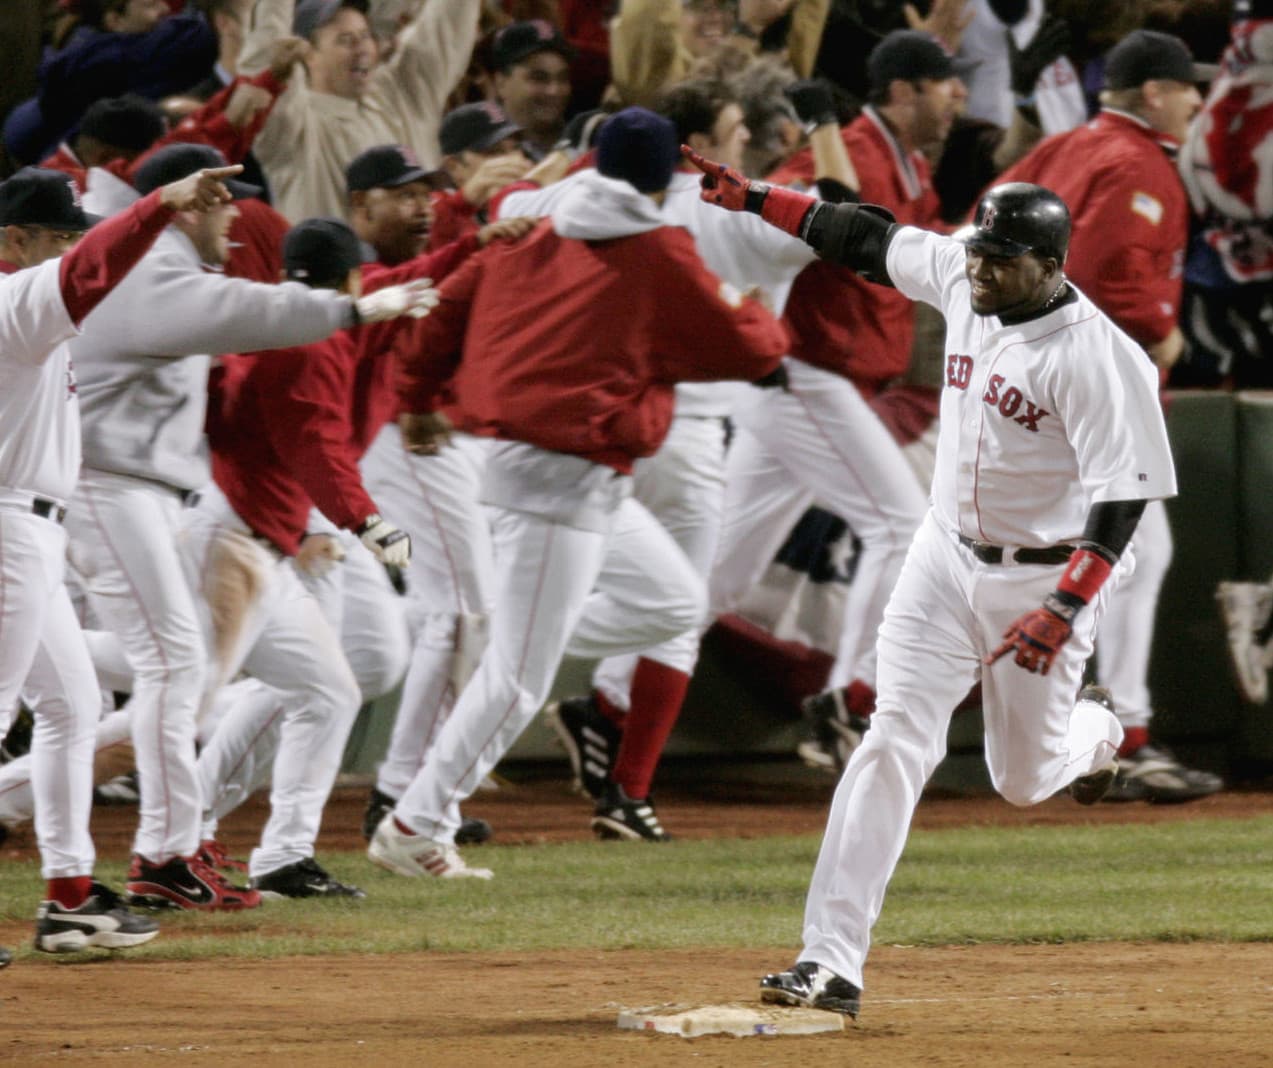 Red Sox's David Ortiz celebrates as he rounds first base after hitting a game-winning home run in the 12th inning of Game 4 of the AL championship series against the Yankees, on Oct. 17, 2004, at Fenway Park. (Amy Sancetta/AP)